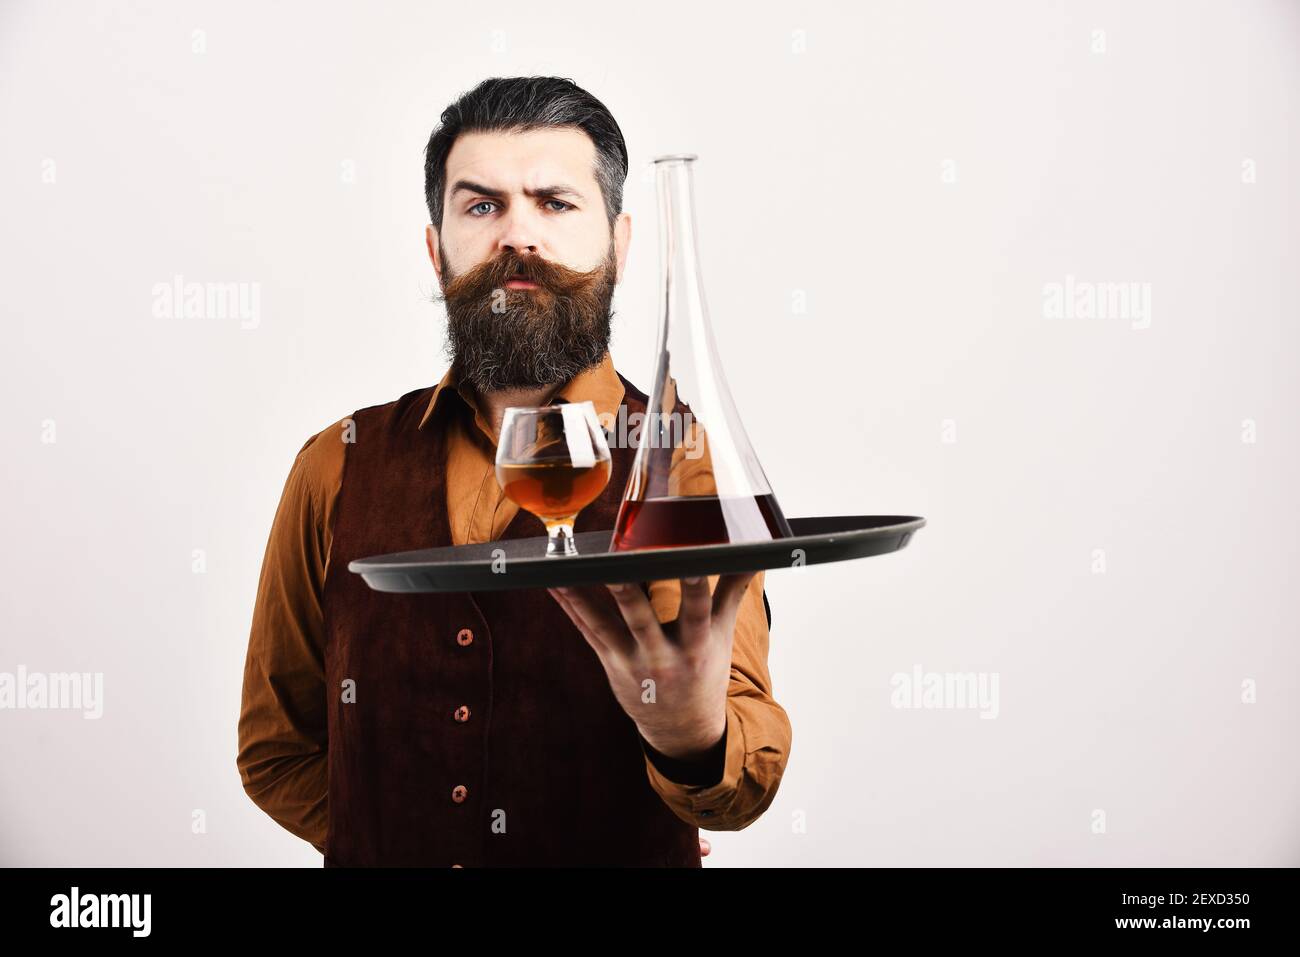 Barman with serious face serves scotch or brandy. Waiter with glass and bottle of whiskey on tray. Man with beard holds cognac on white background, copy space. Restaurant service and drinks concept. Stock Photo